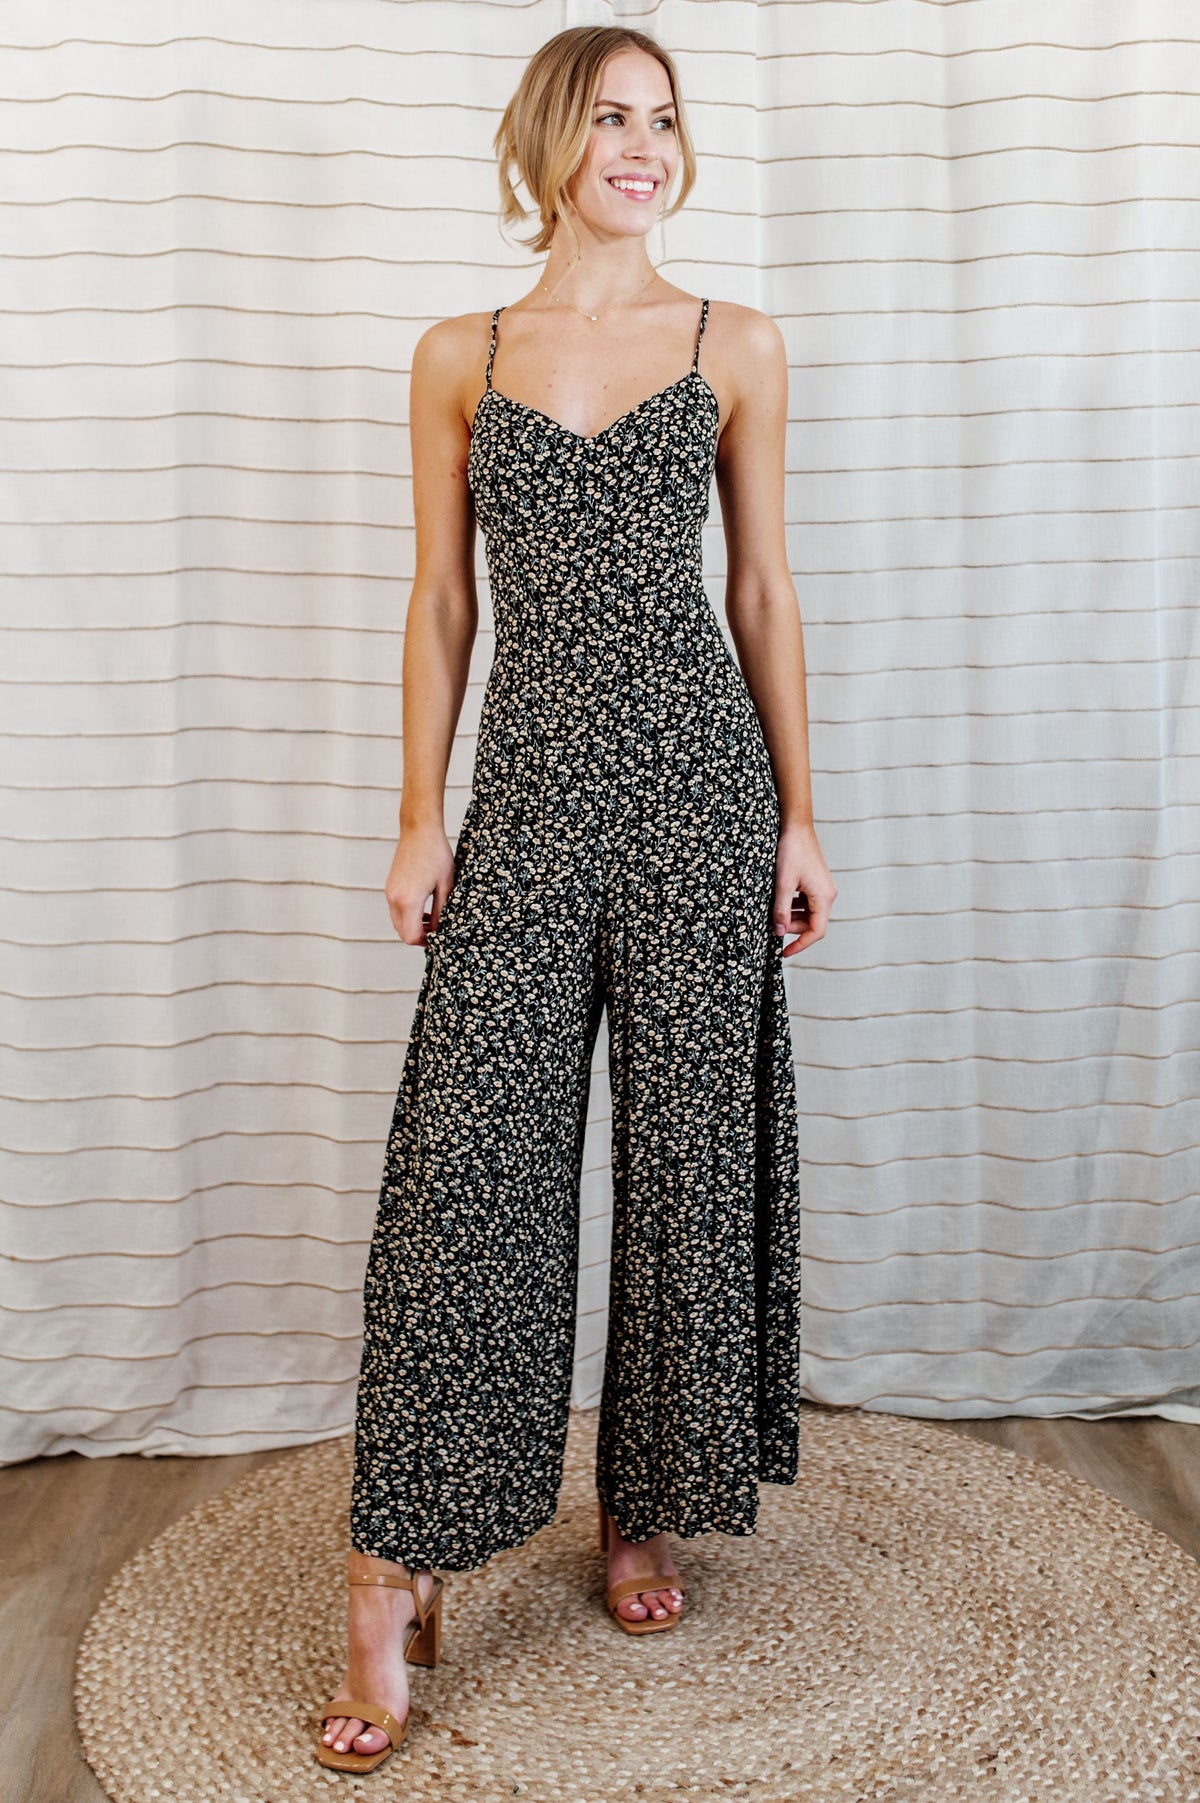 Pictured is a floral jumpsuit with a sweetheart bust, criss-cross shoulder ties, strappy open back, and wide-leg pants.